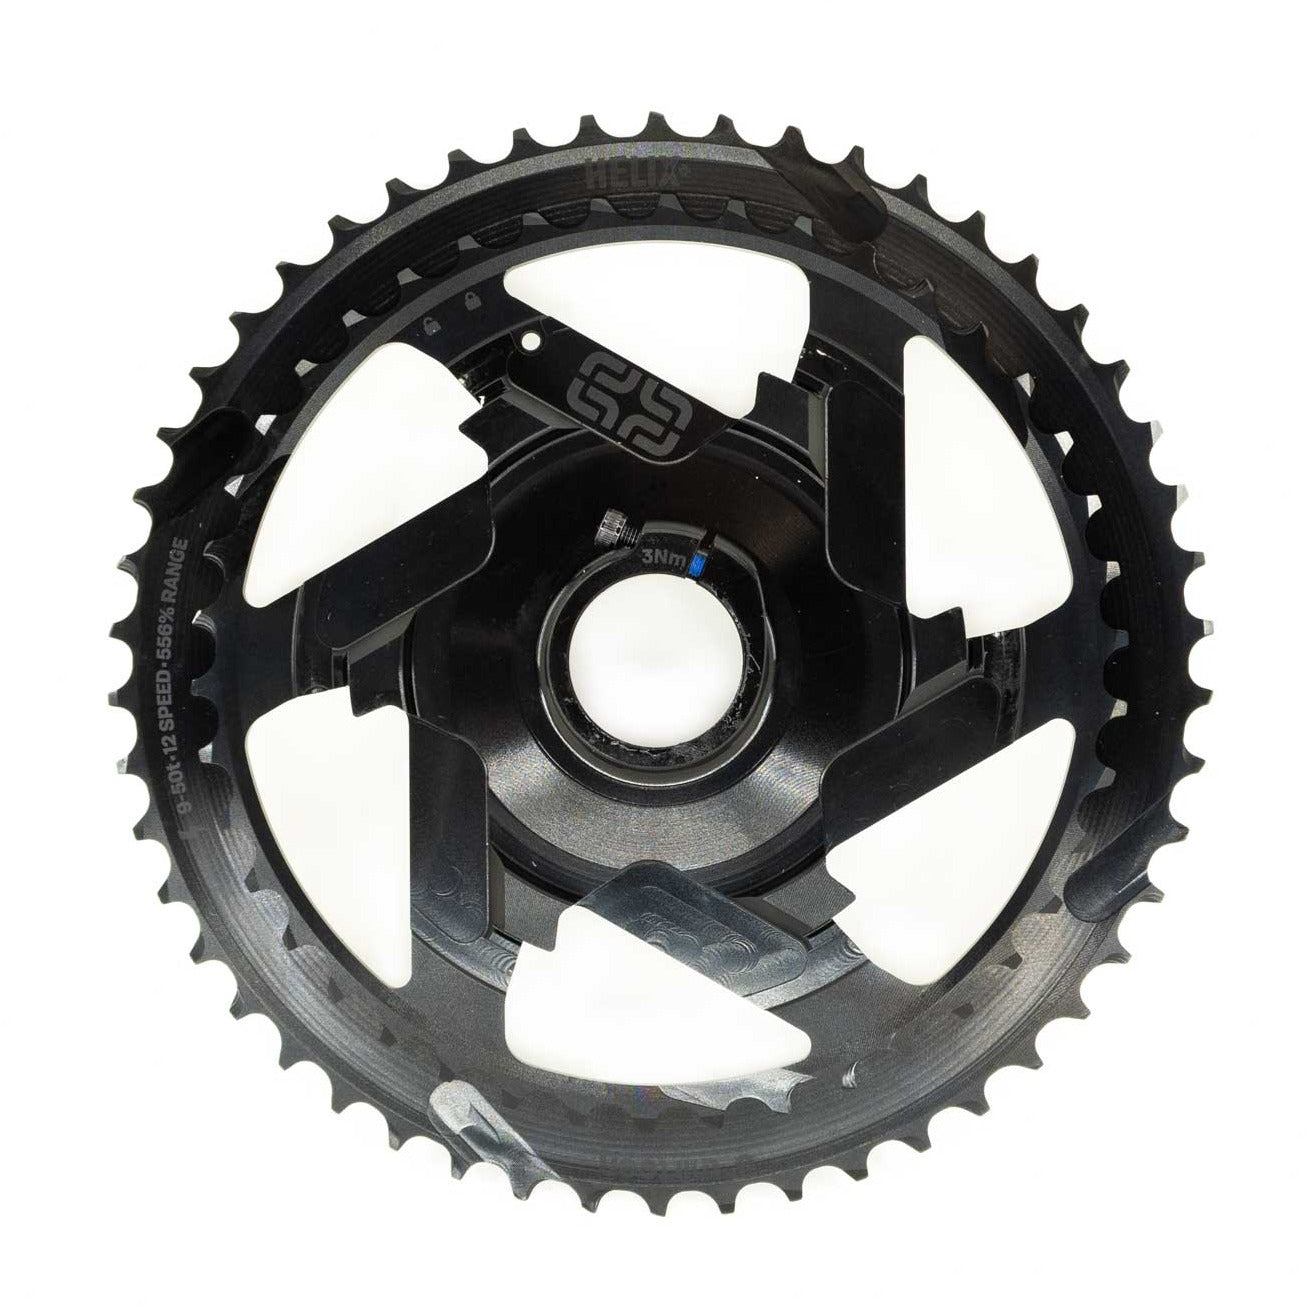 Helix Plus 12-Speed 9-50T Cassette Replacement Clusters